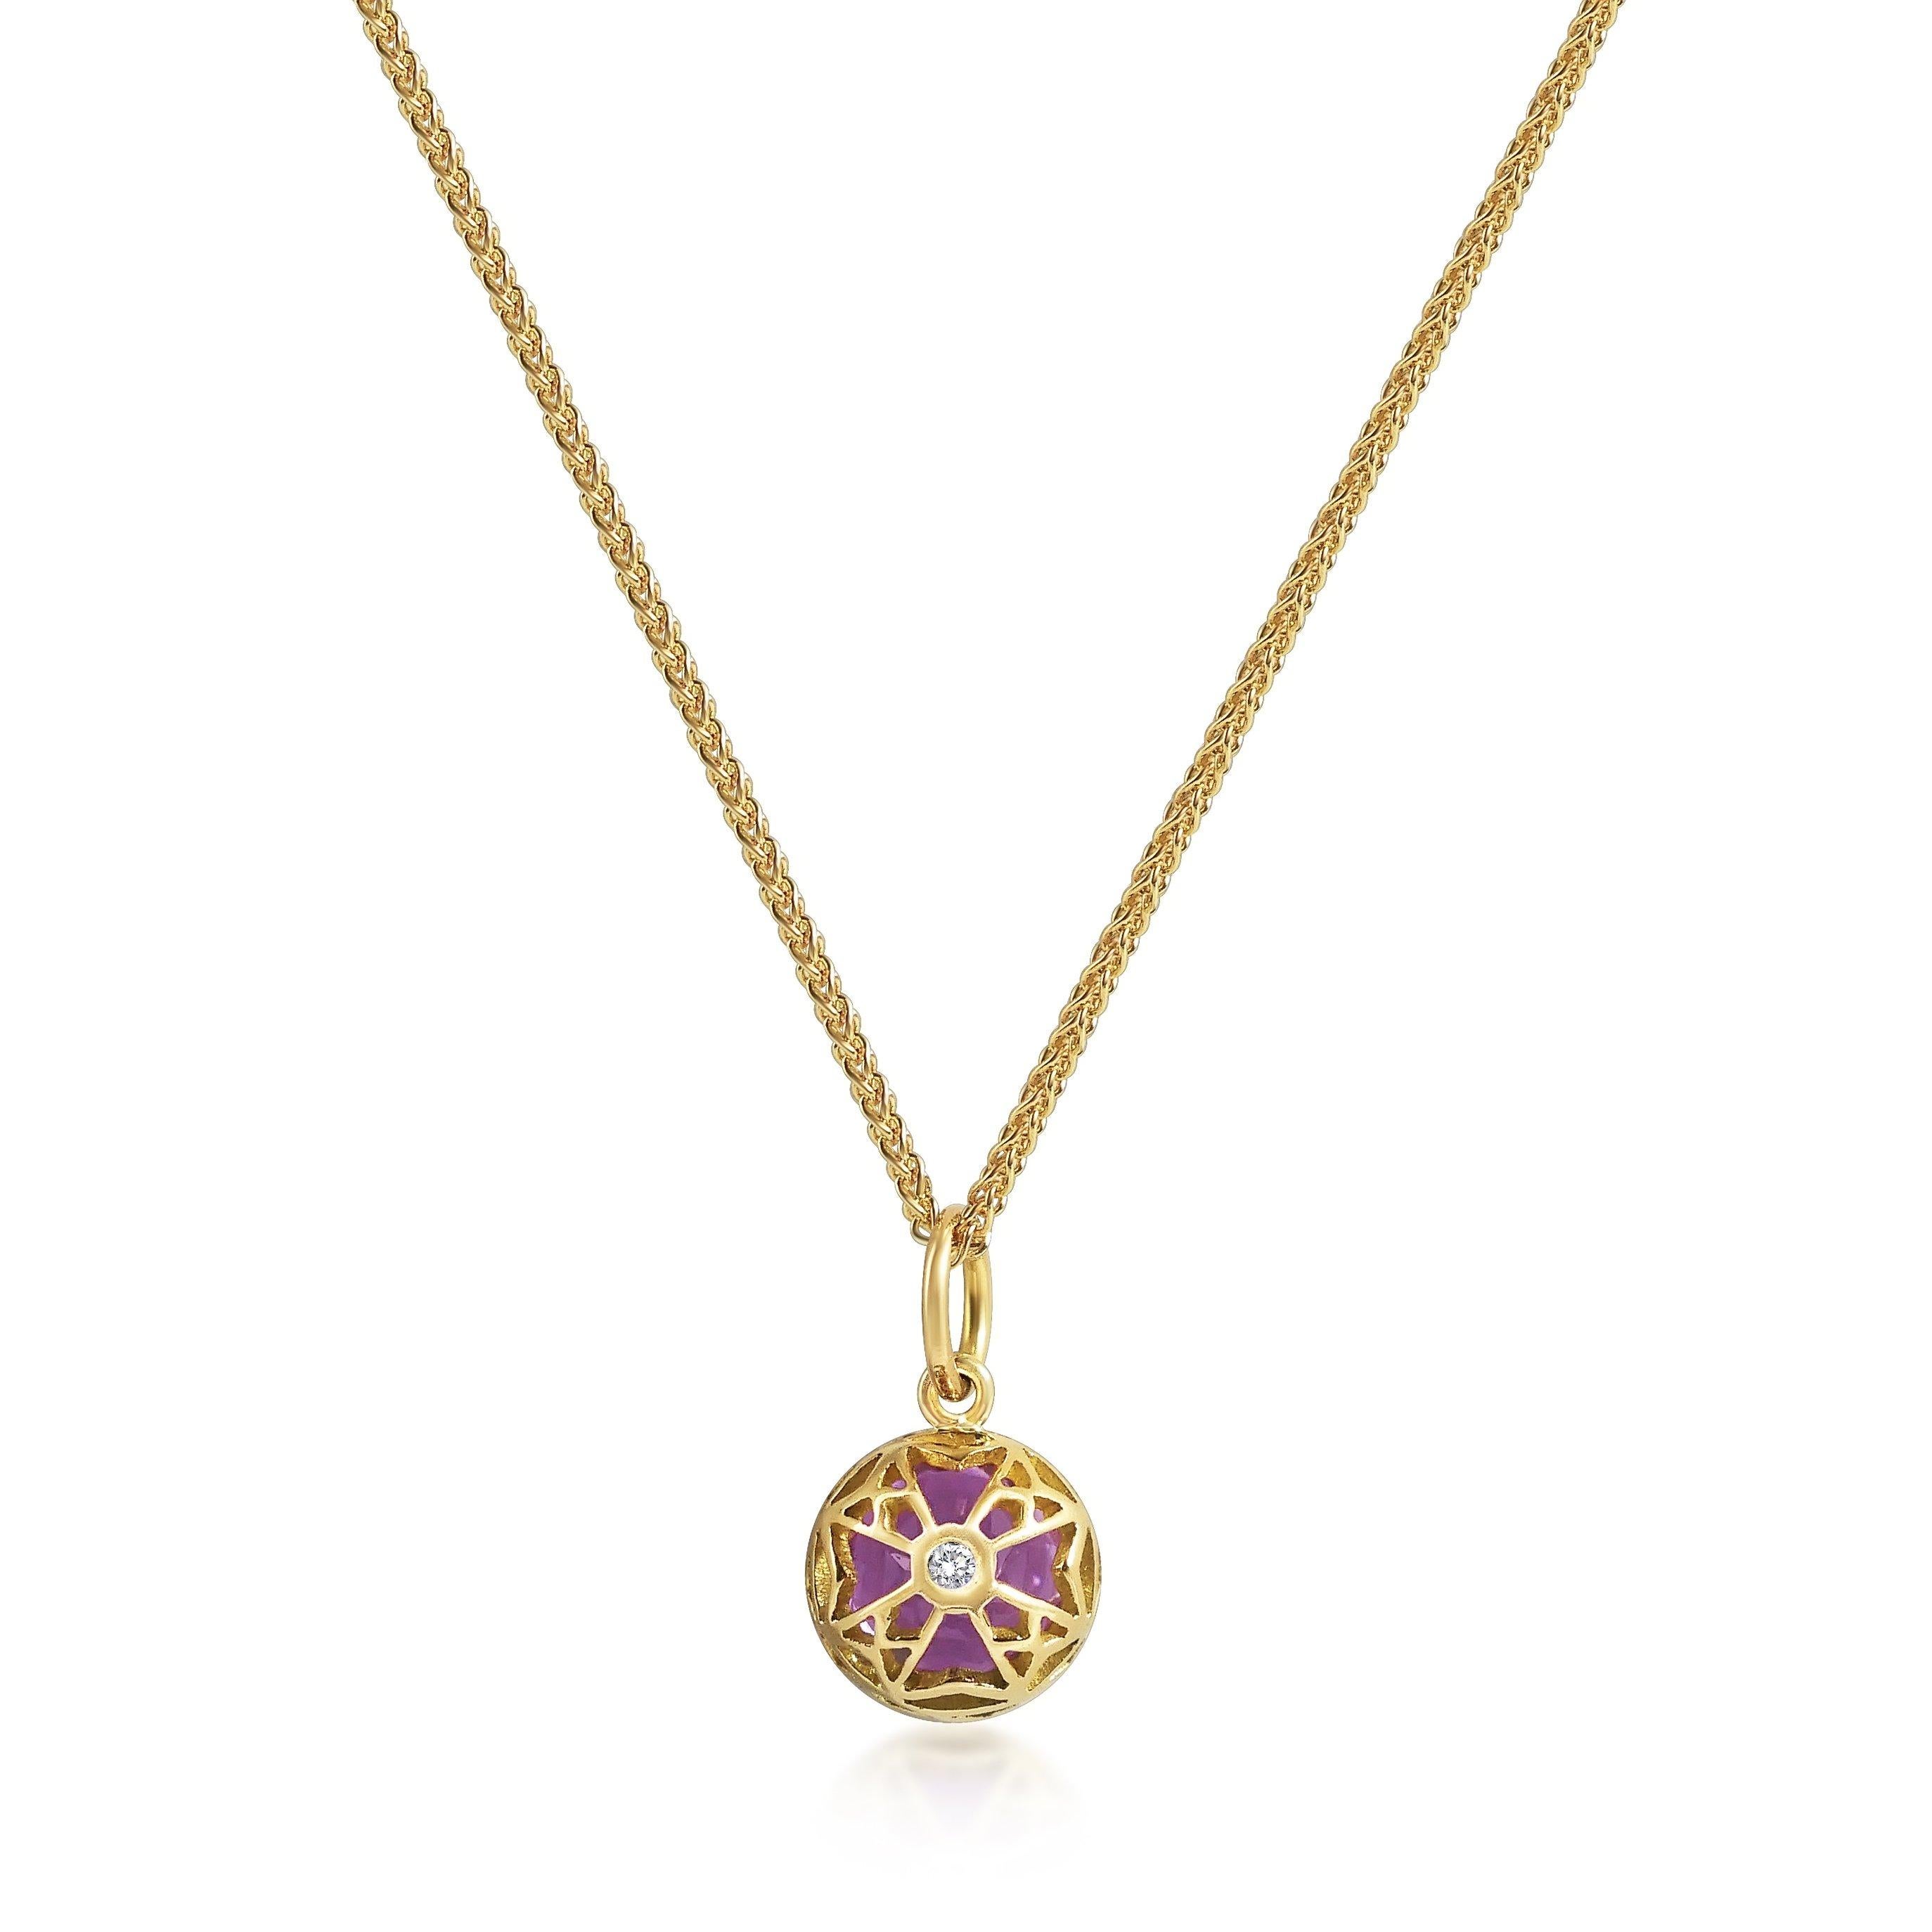 Handcrafted 1,40 Carats Amethyst 18 Karat Yellow Gold Pendant Necklace. The 7mm natural stone is set in our iconic hand pierced gold lace to let the light through. 

Here presented on our finely knitted gold chains. Chain is included in the price,